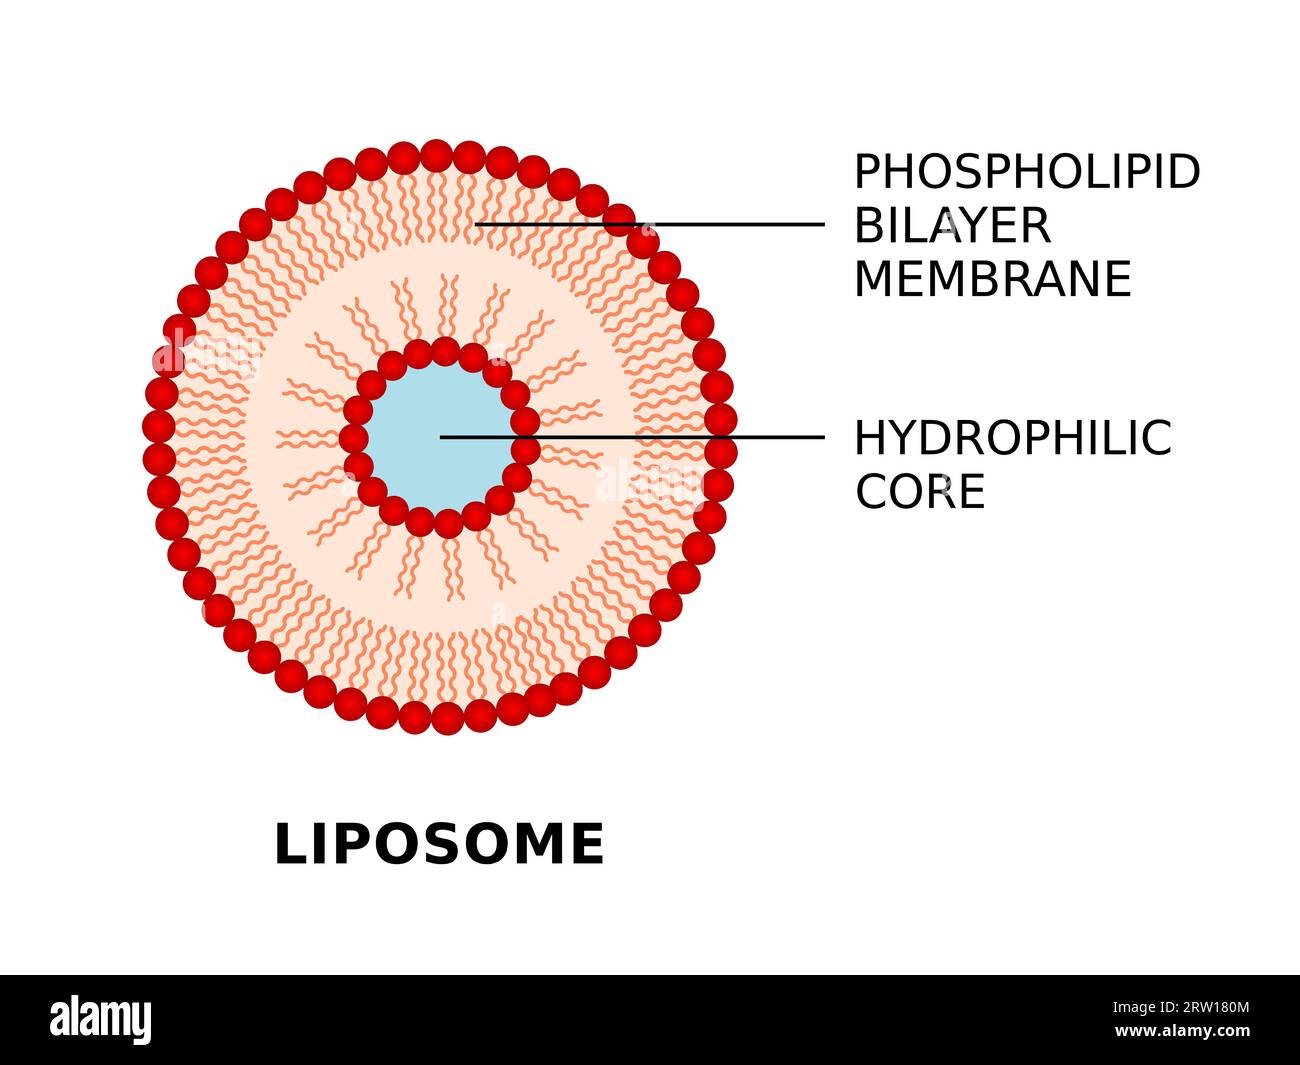 Liposome structure. Phospholipid bilayer membrane and hydrophilic core. Spherical vesicles deliver nutrients to cell. Useful drug delivery system. Stock Vector